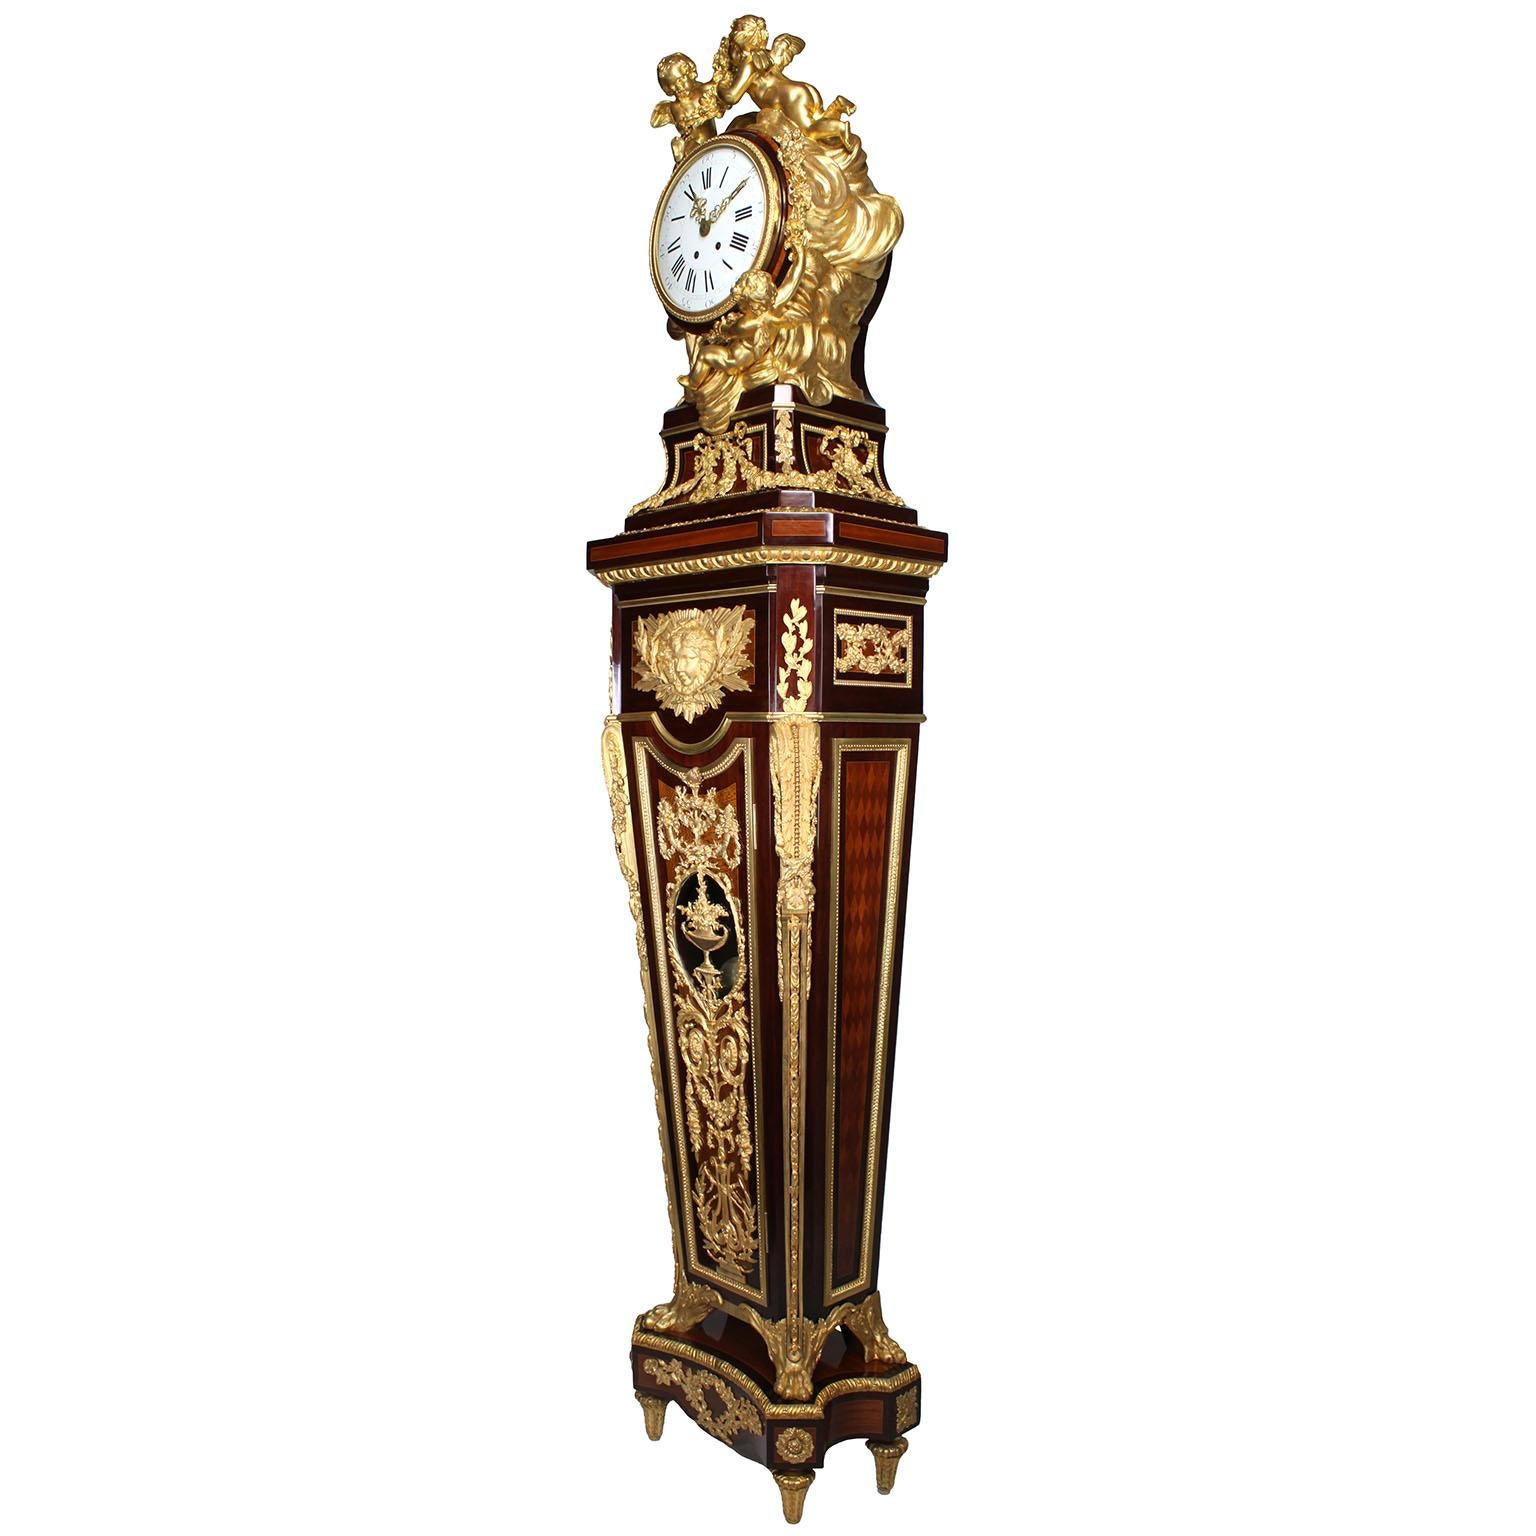 A Very Fine French 19th Century Louis XVI style ormolu-mounted amaranth, tulipwood, sycamore and parquetry pedestal 